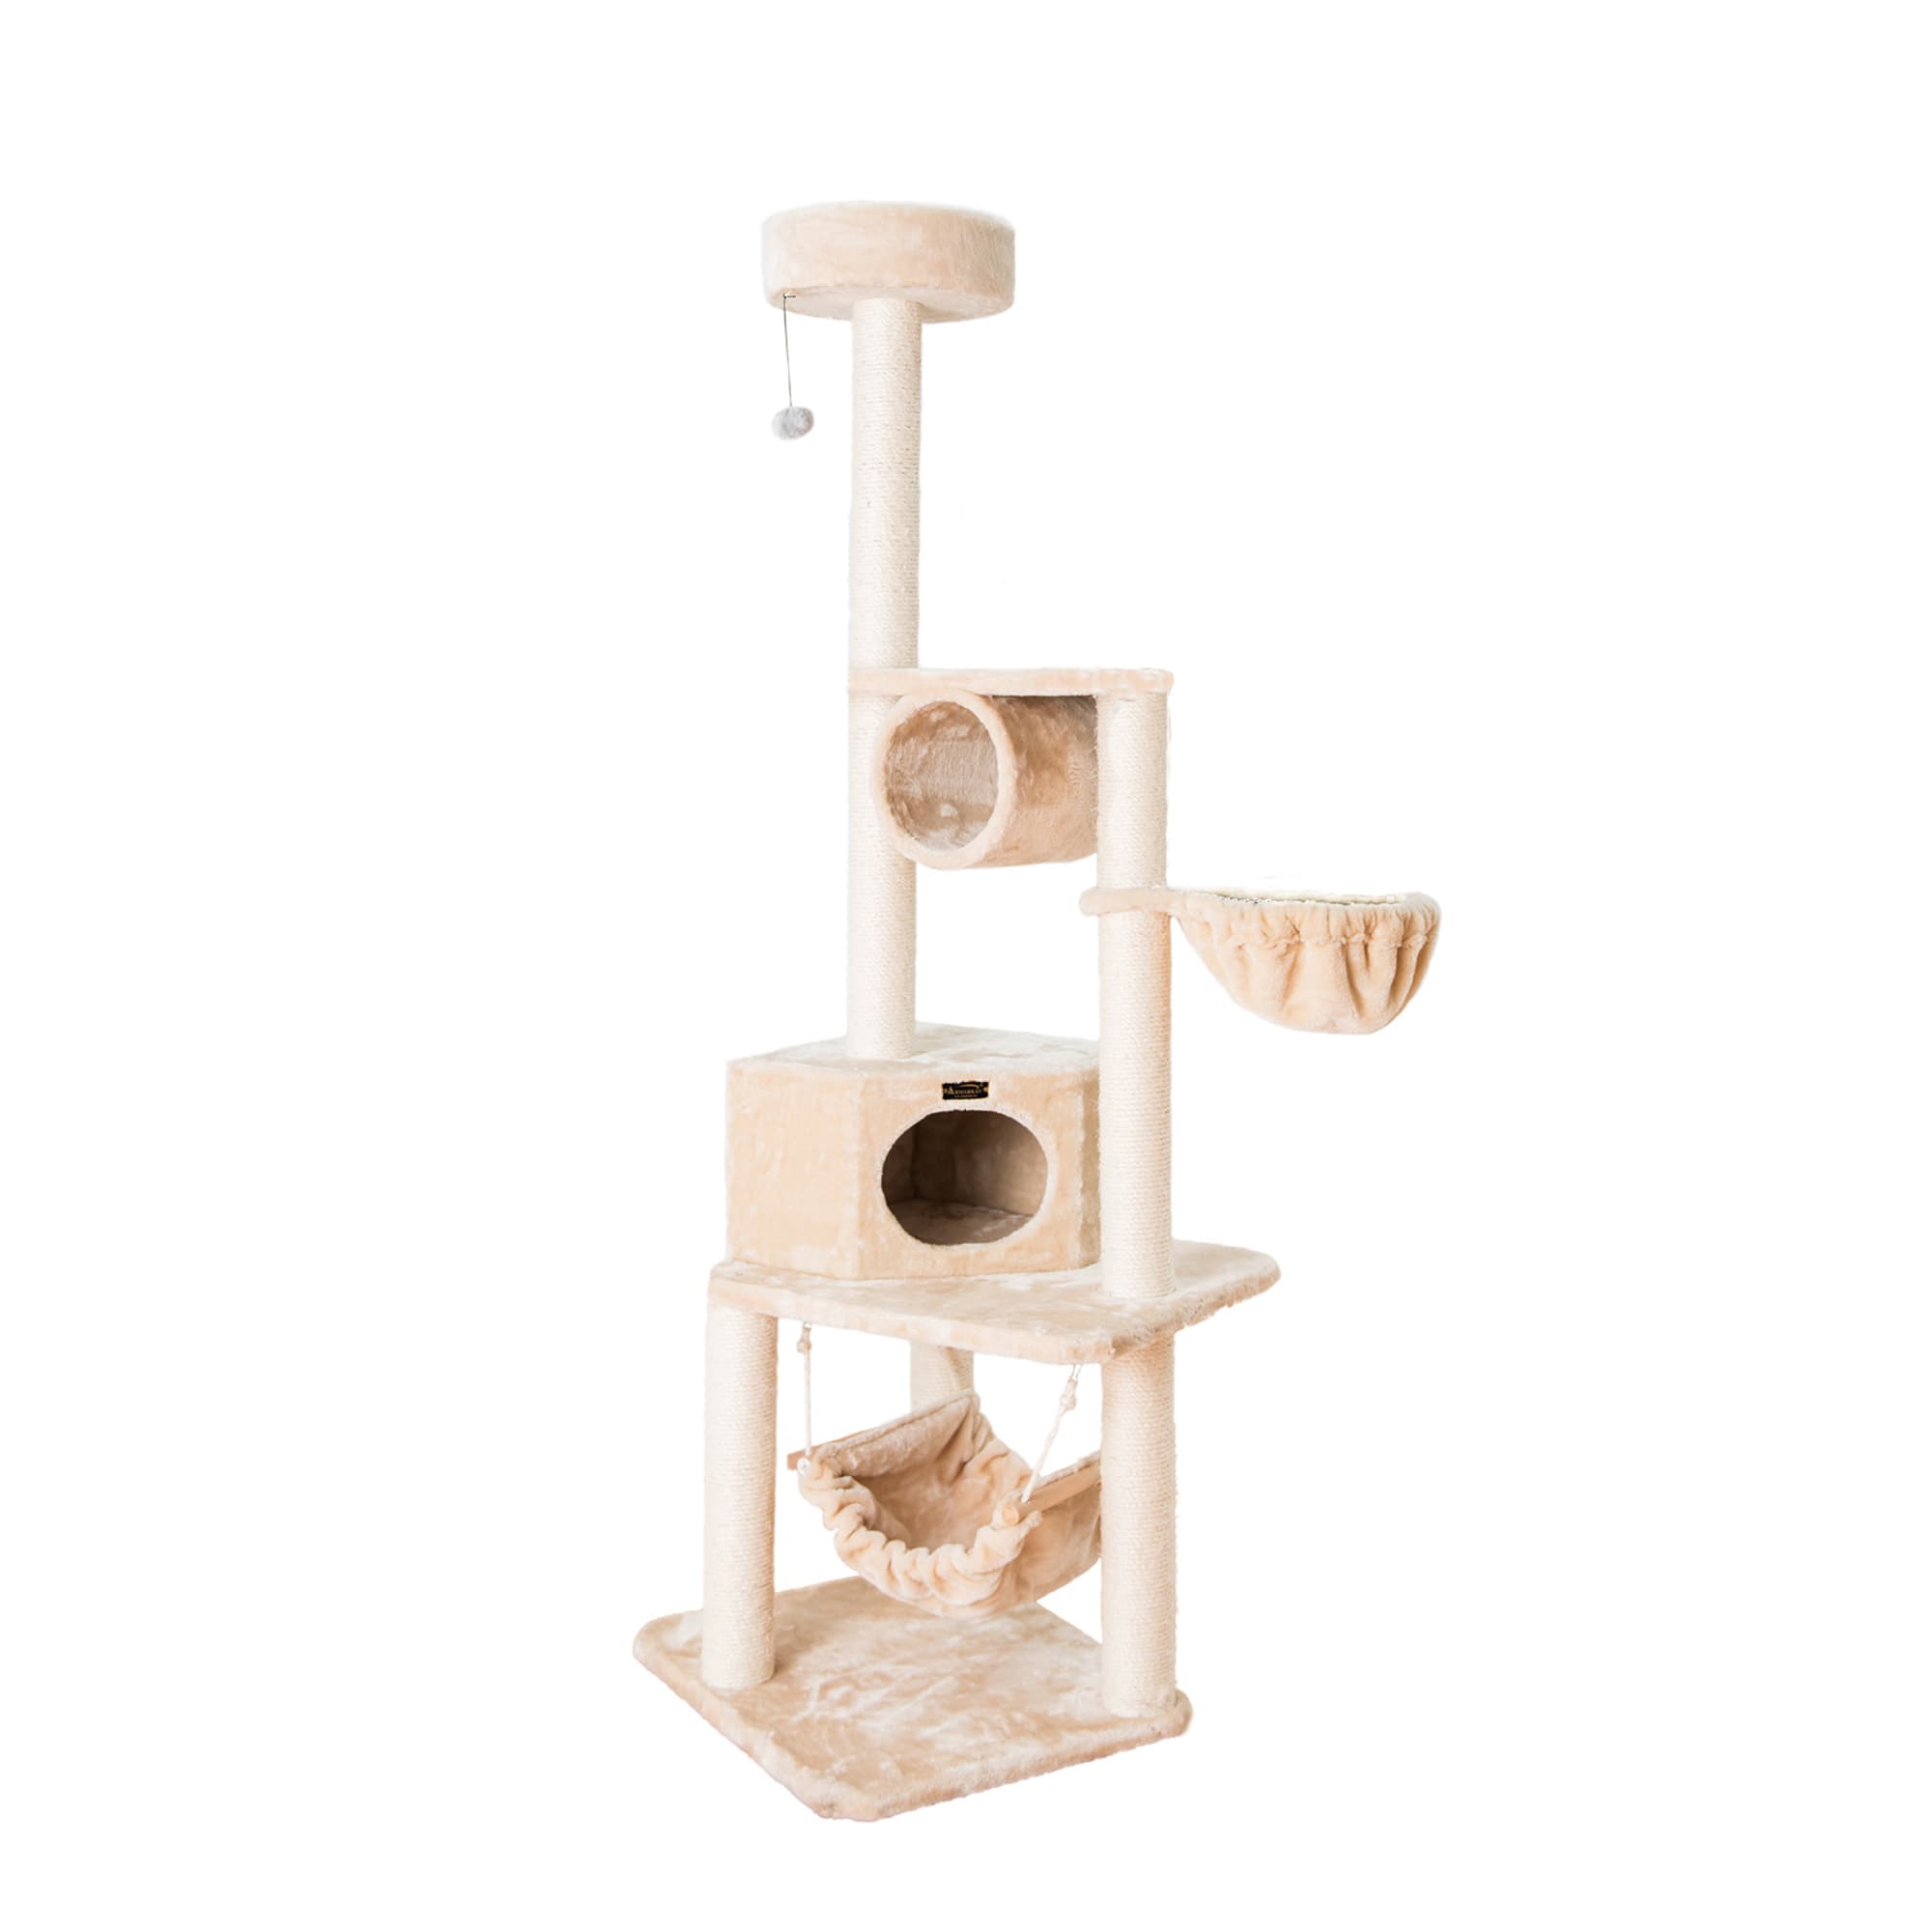 Photos - Other for Cats Armarkat Beige Classic Real Wood Cat Tree Model A7204, 72" H, 44 